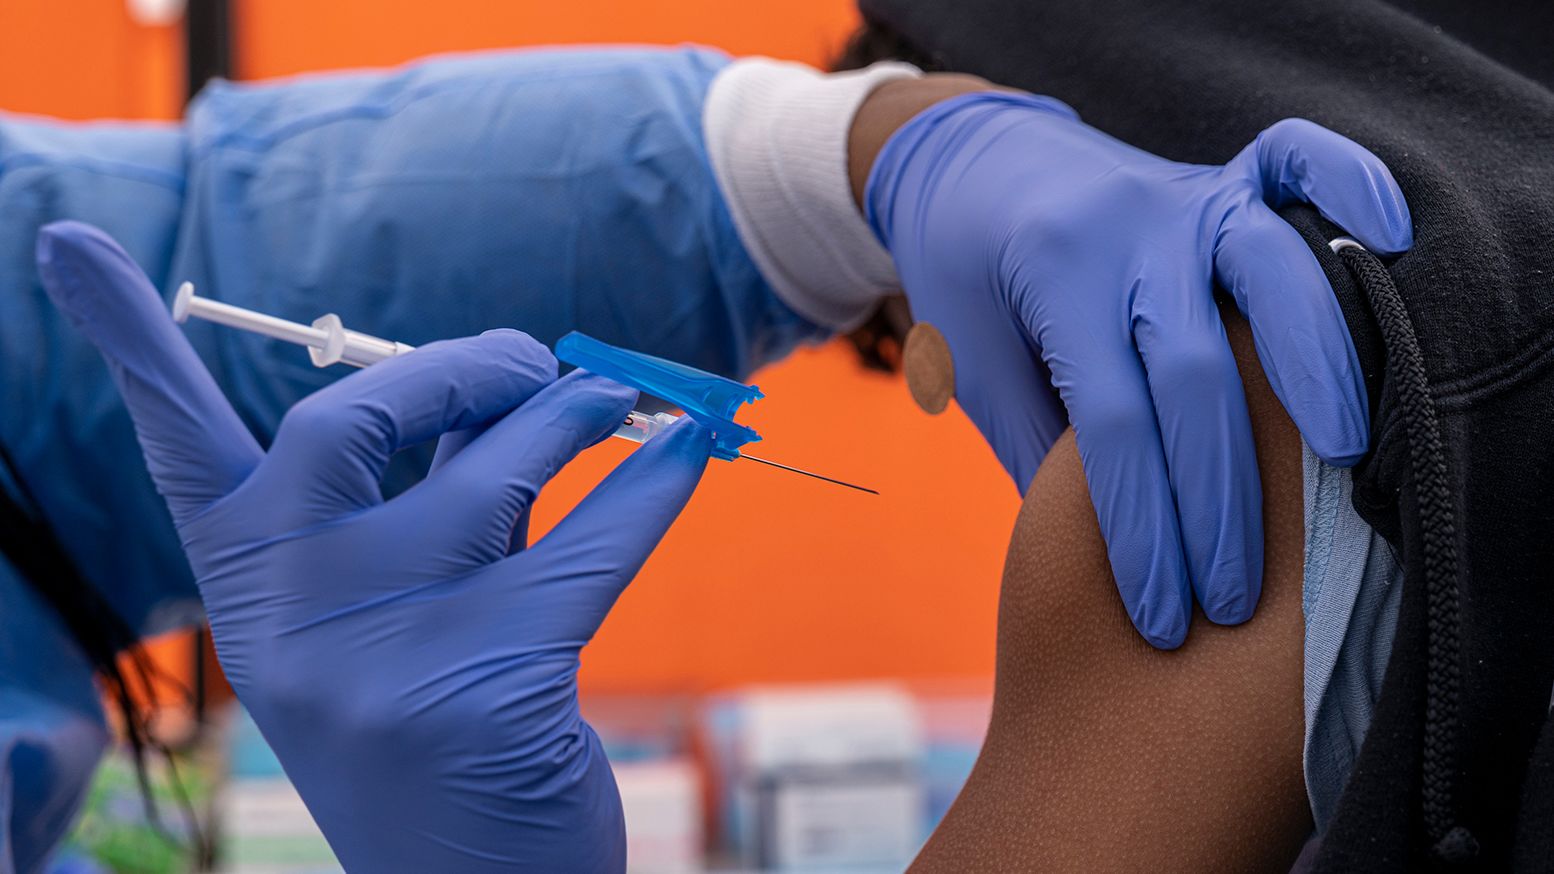 A health care worker administers a Pfizer-BioNTech Covid-19 vaccination to a child at a testing and vaccination site in San Francisco on January 10, 2022.